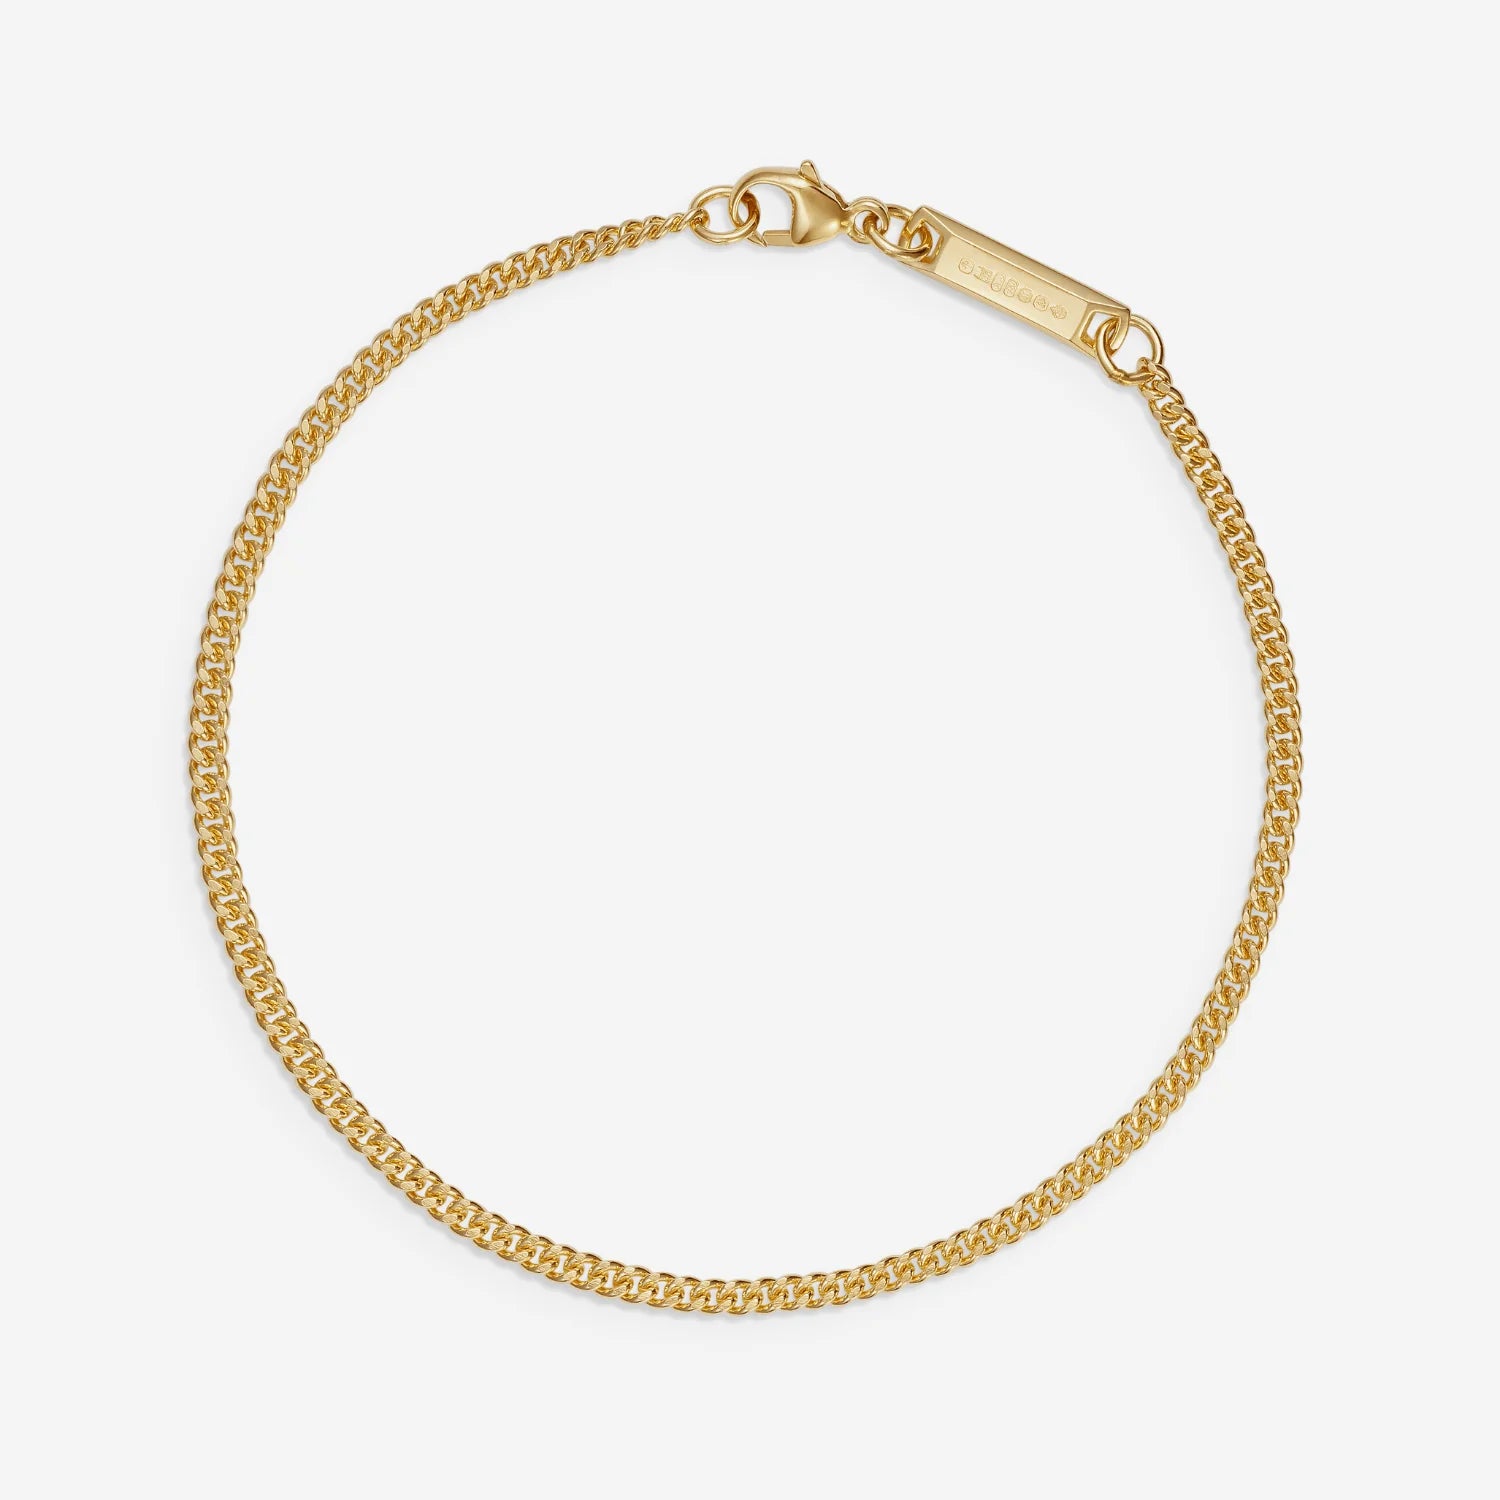 886 Fine Curb Chain Bracelet in 18ct Yellow Gold